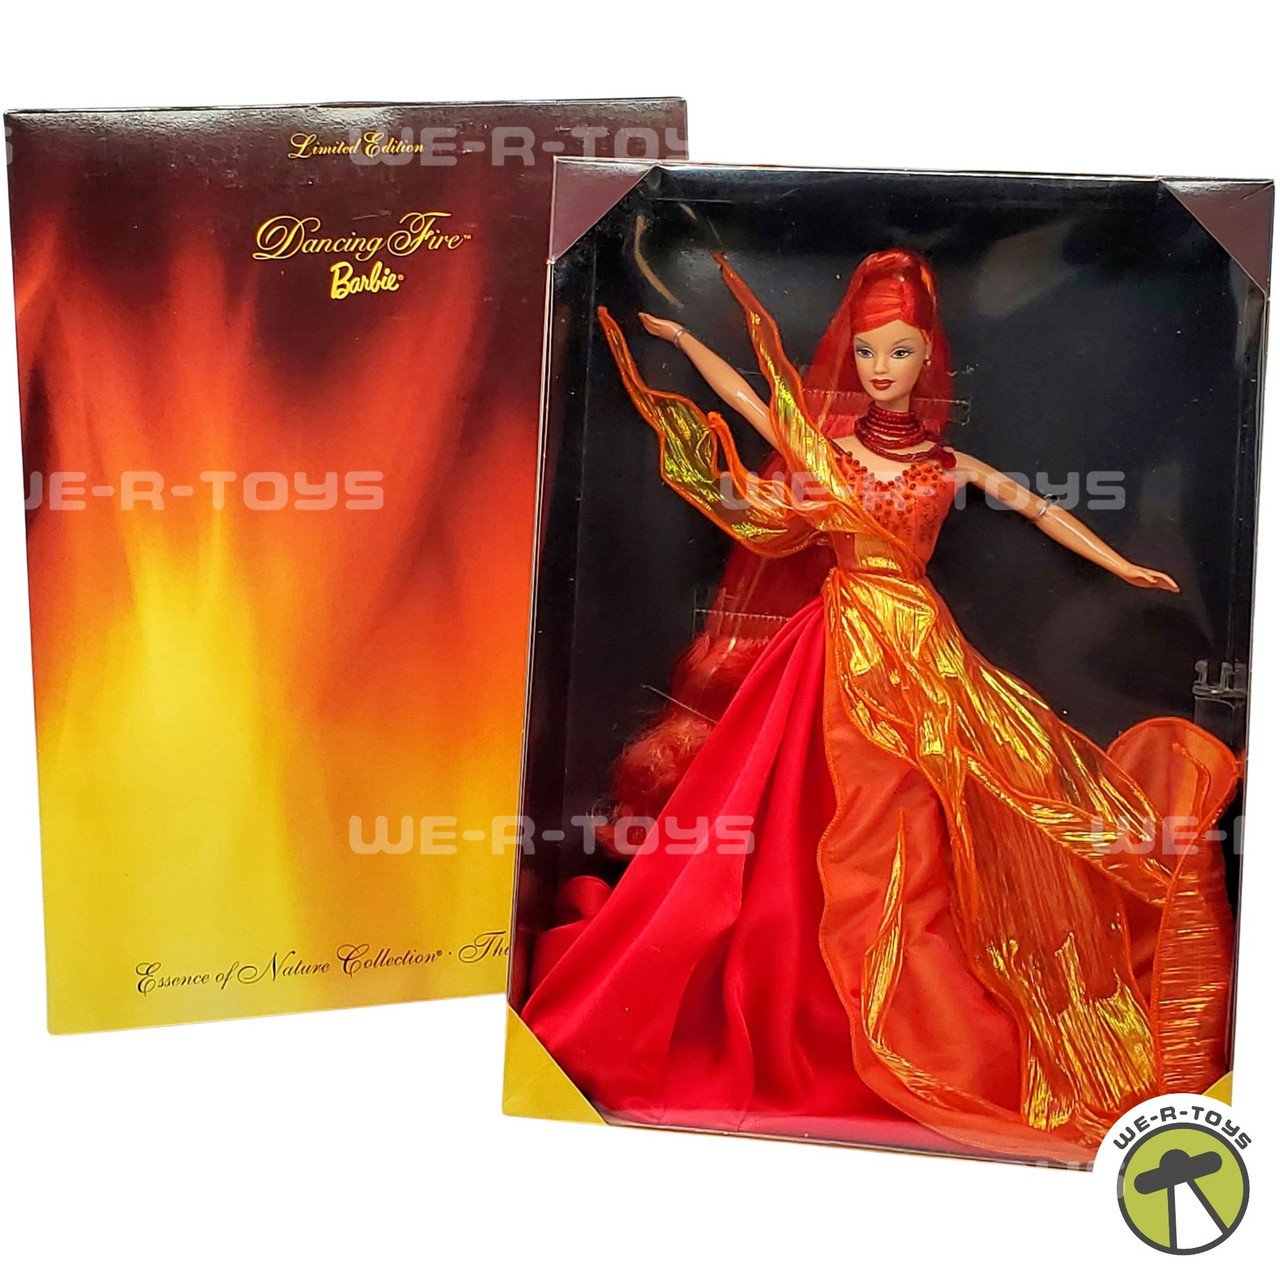 Dancing Fire Barbie Doll Essence of Nature Collection Limited 